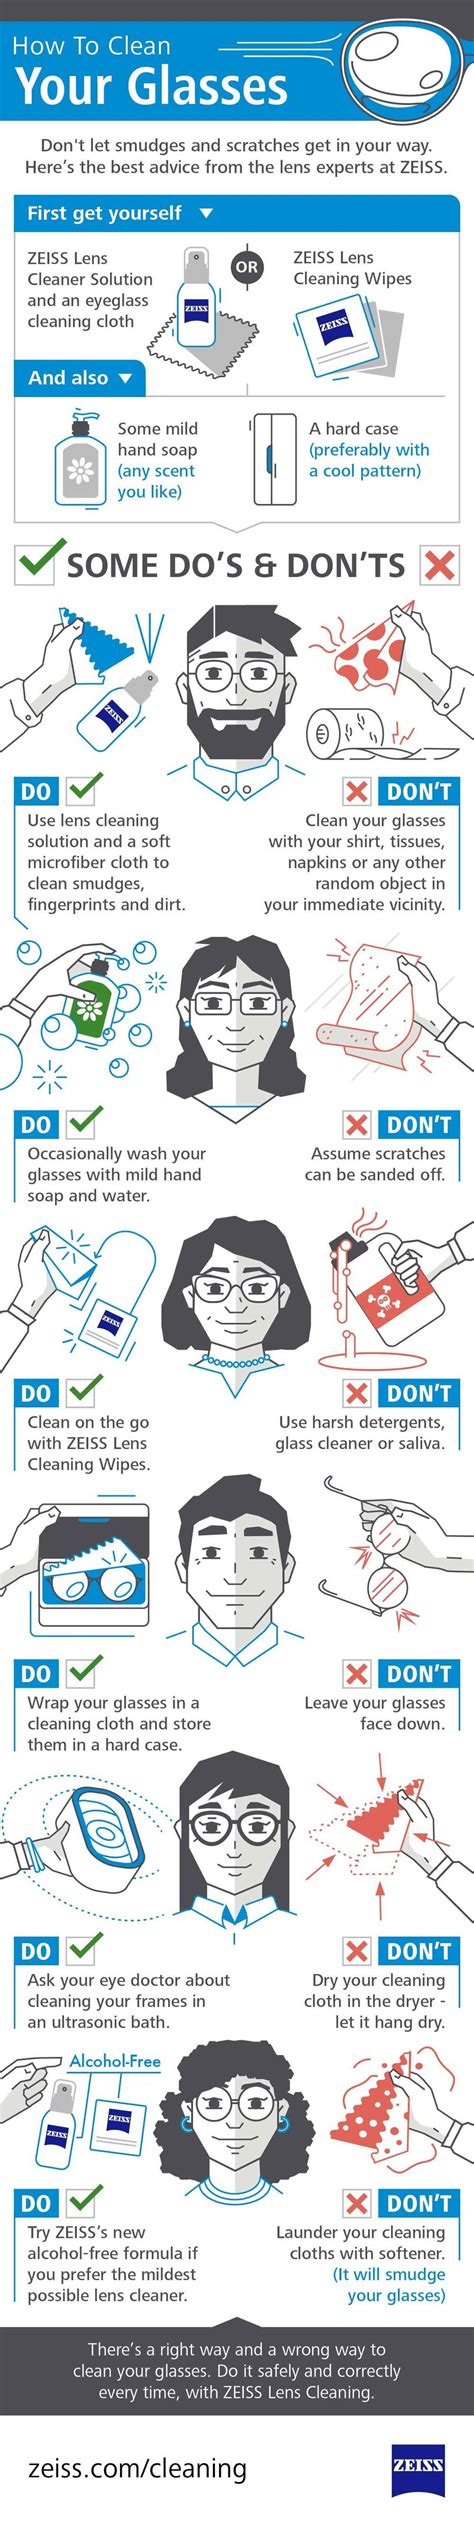 infographic how to clean your glasses eye health eye care eye facts